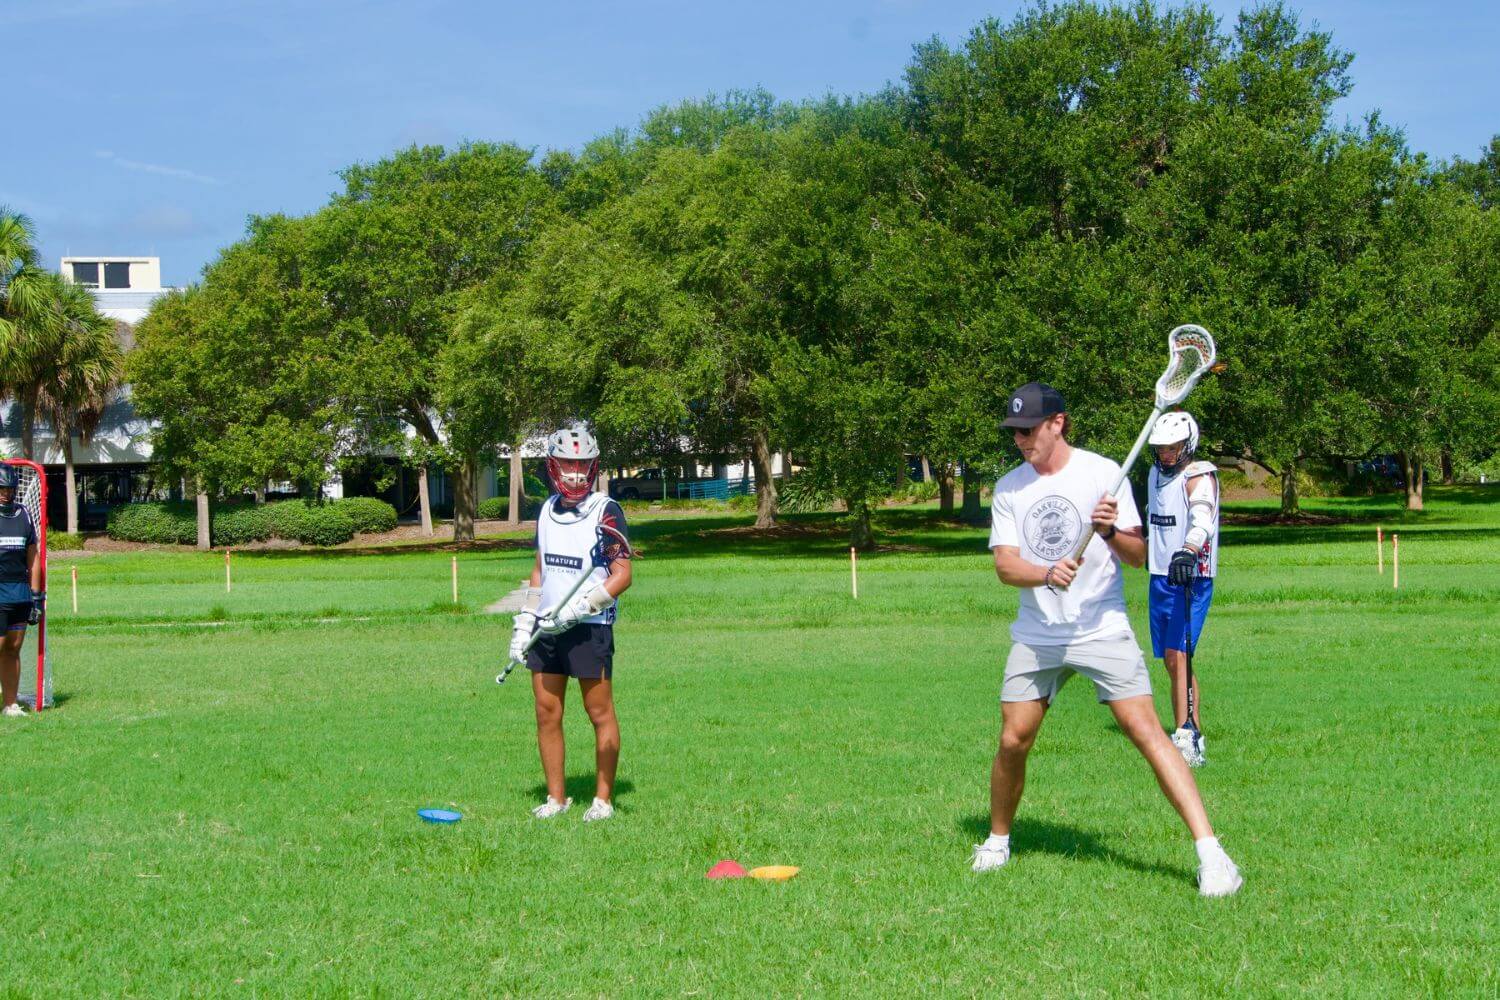 Professional lacrosse player giving instruction during lacrosse practice at overnight sports camp